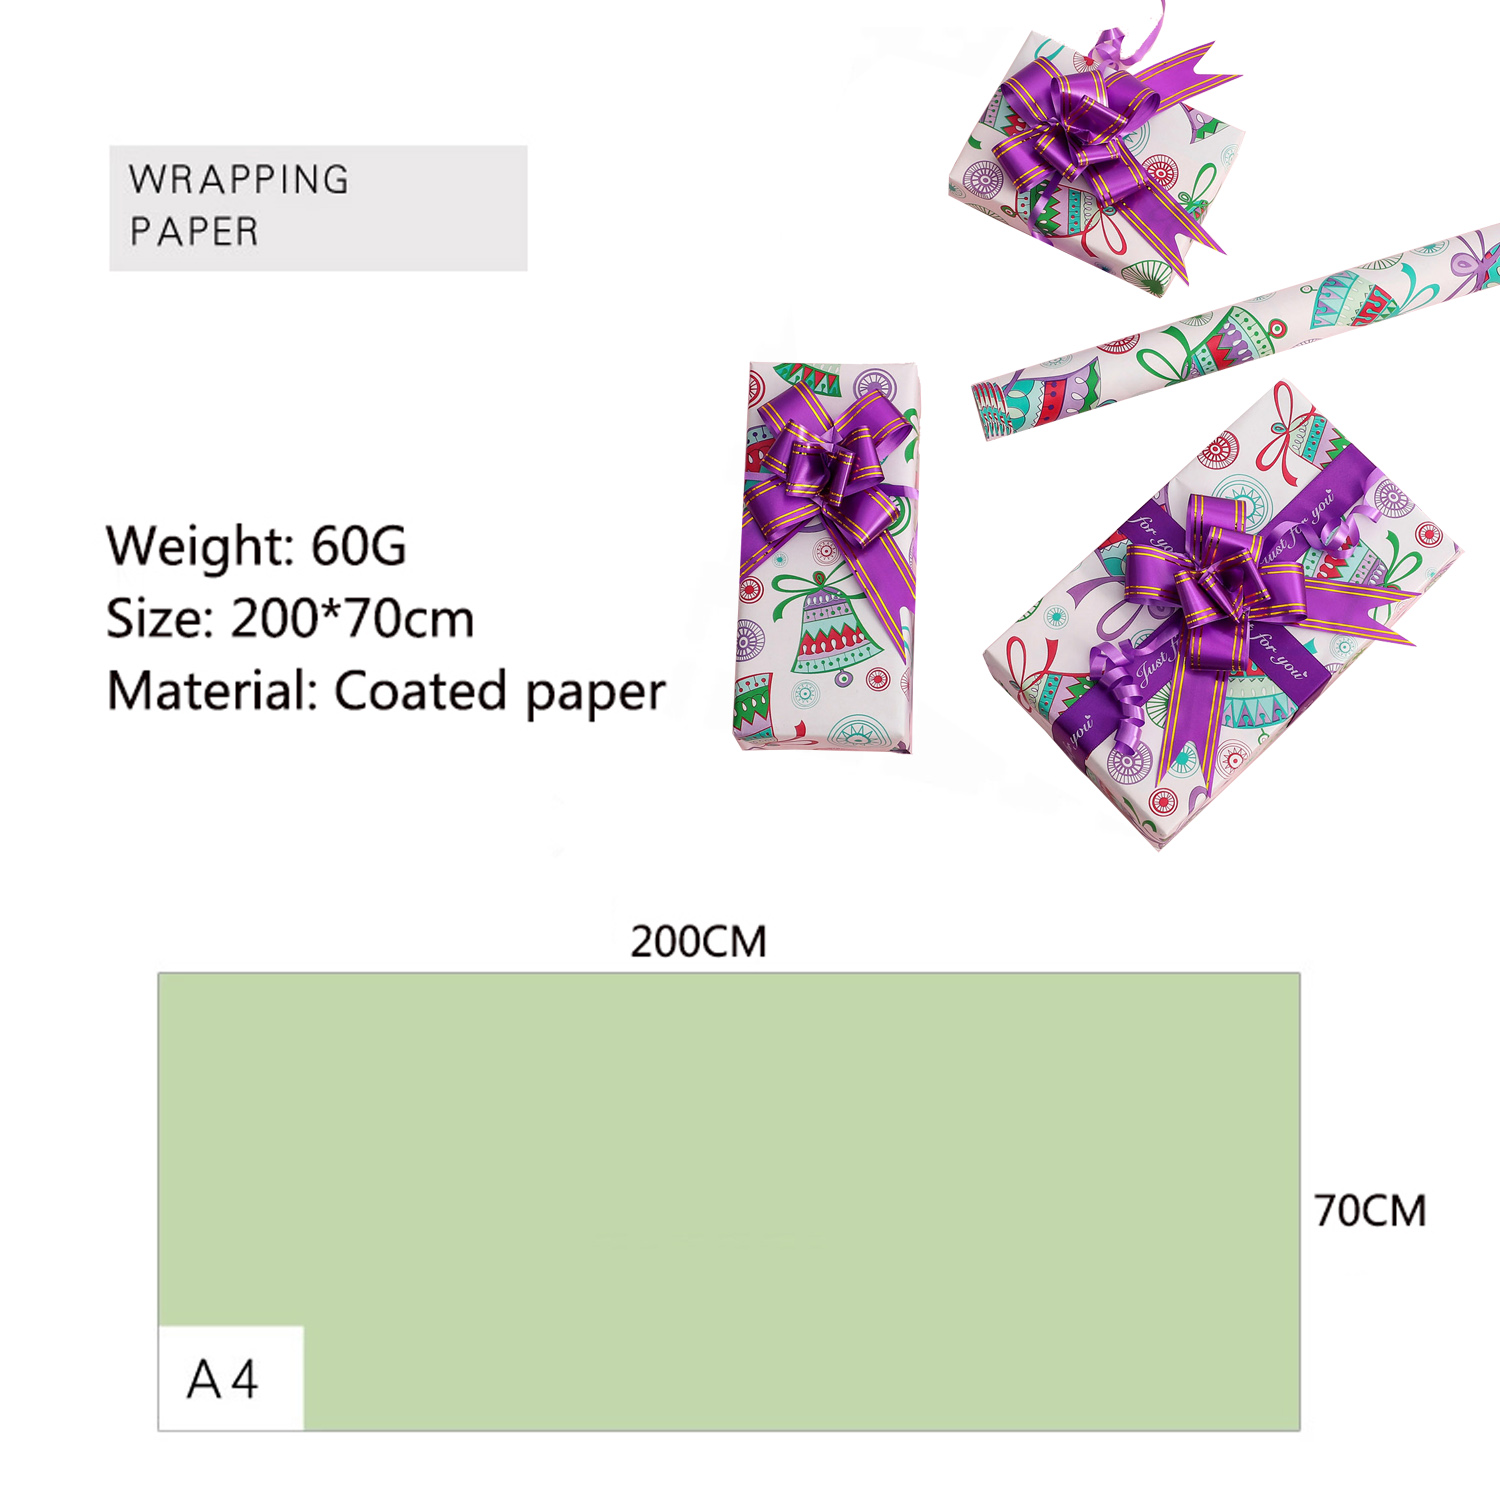 Custom made custom printed wrapping paper rolls wholesale supply for gift package-1